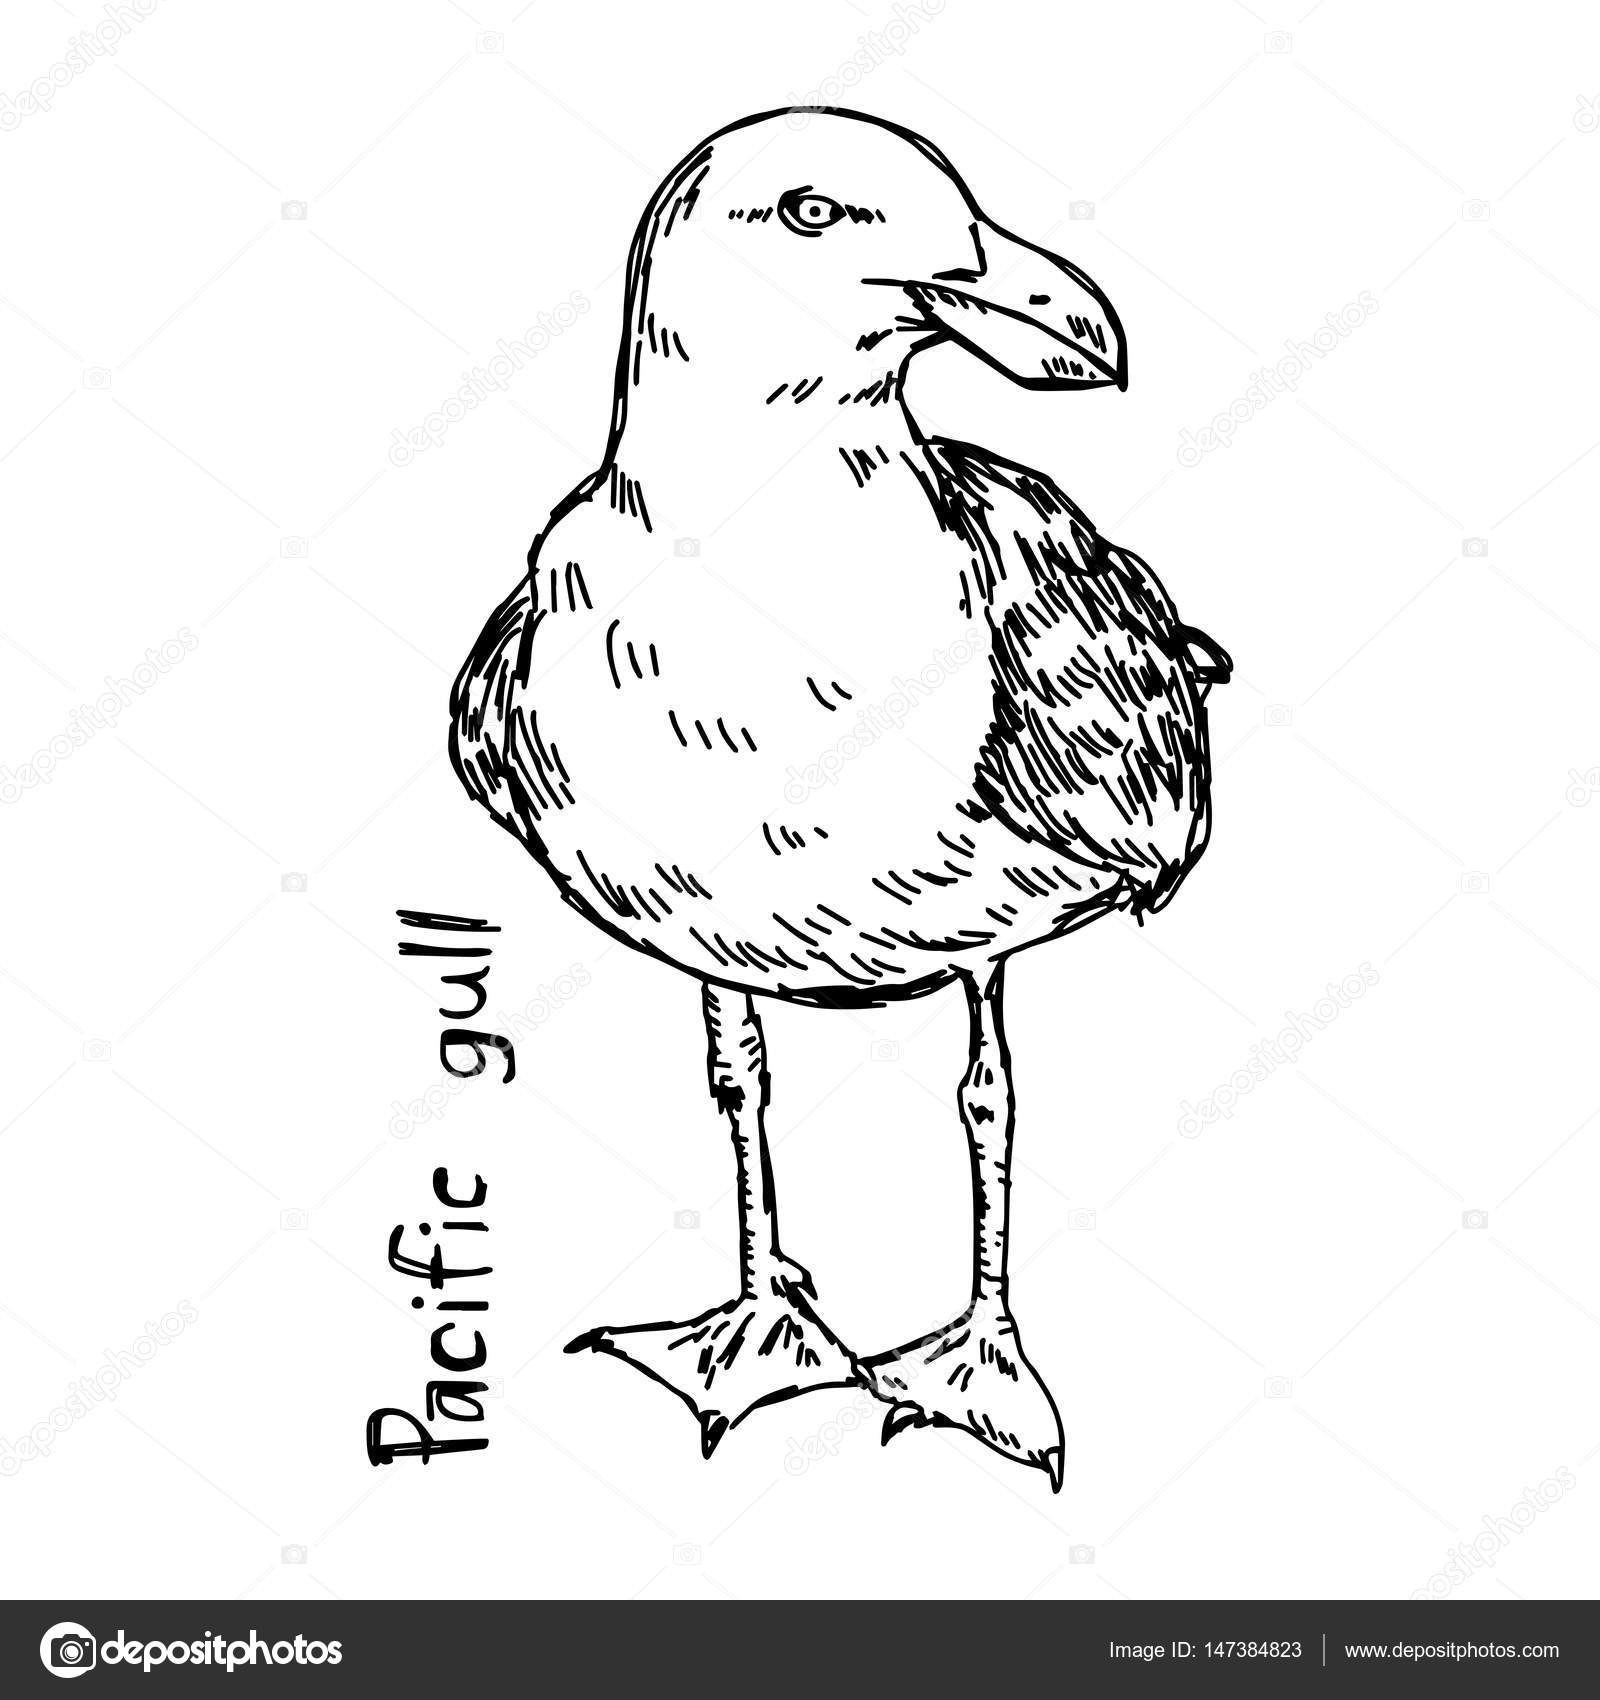 Seagulls Drawing at GetDrawings.com | Free for personal use Seagulls